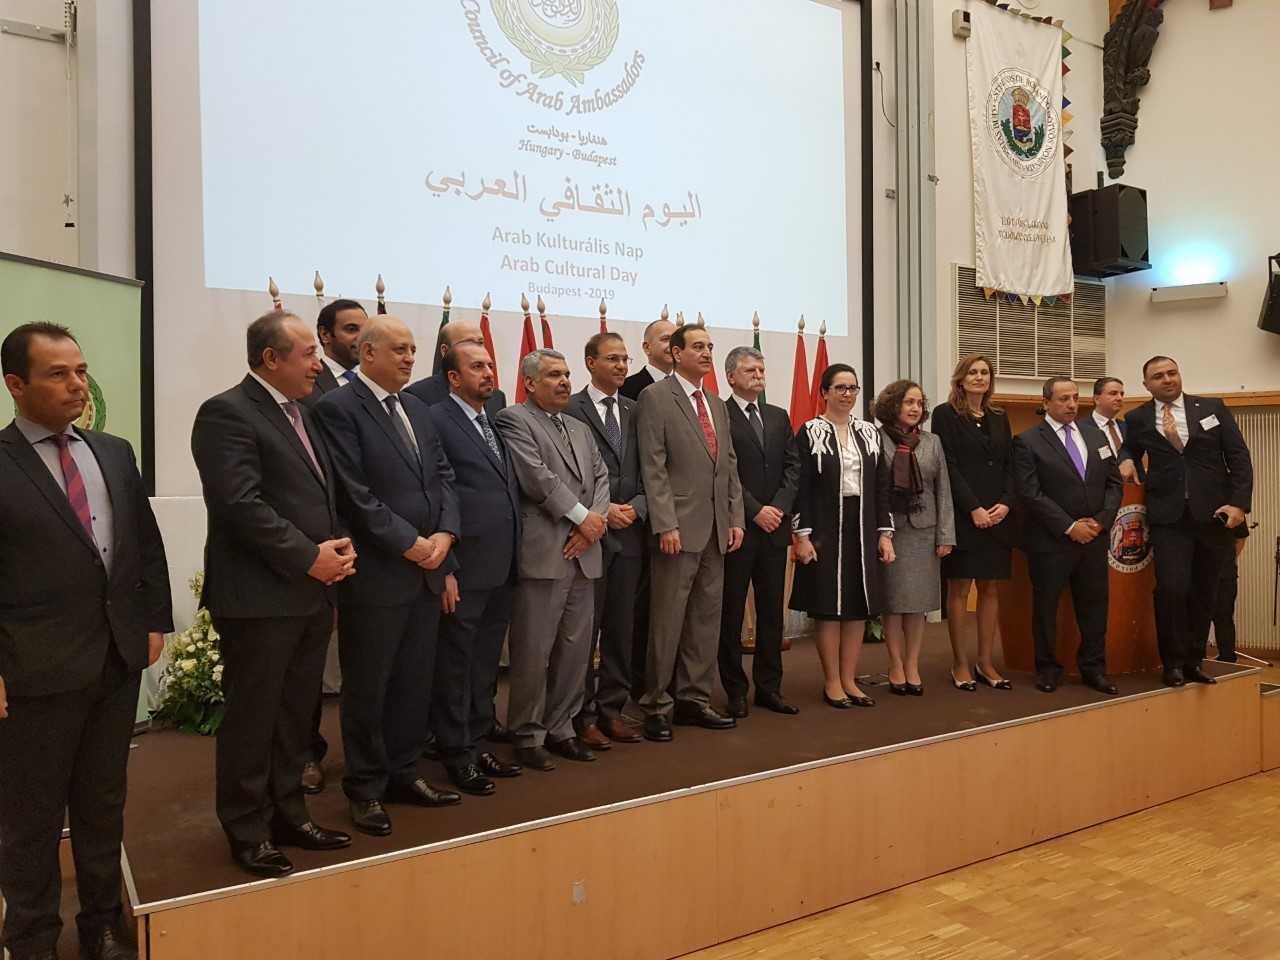 The Speaker of the National Assembly of Hungary Kover Laszlo with the Arab ambassadors on the sidelines of the Arab Cultural Days in Budapest